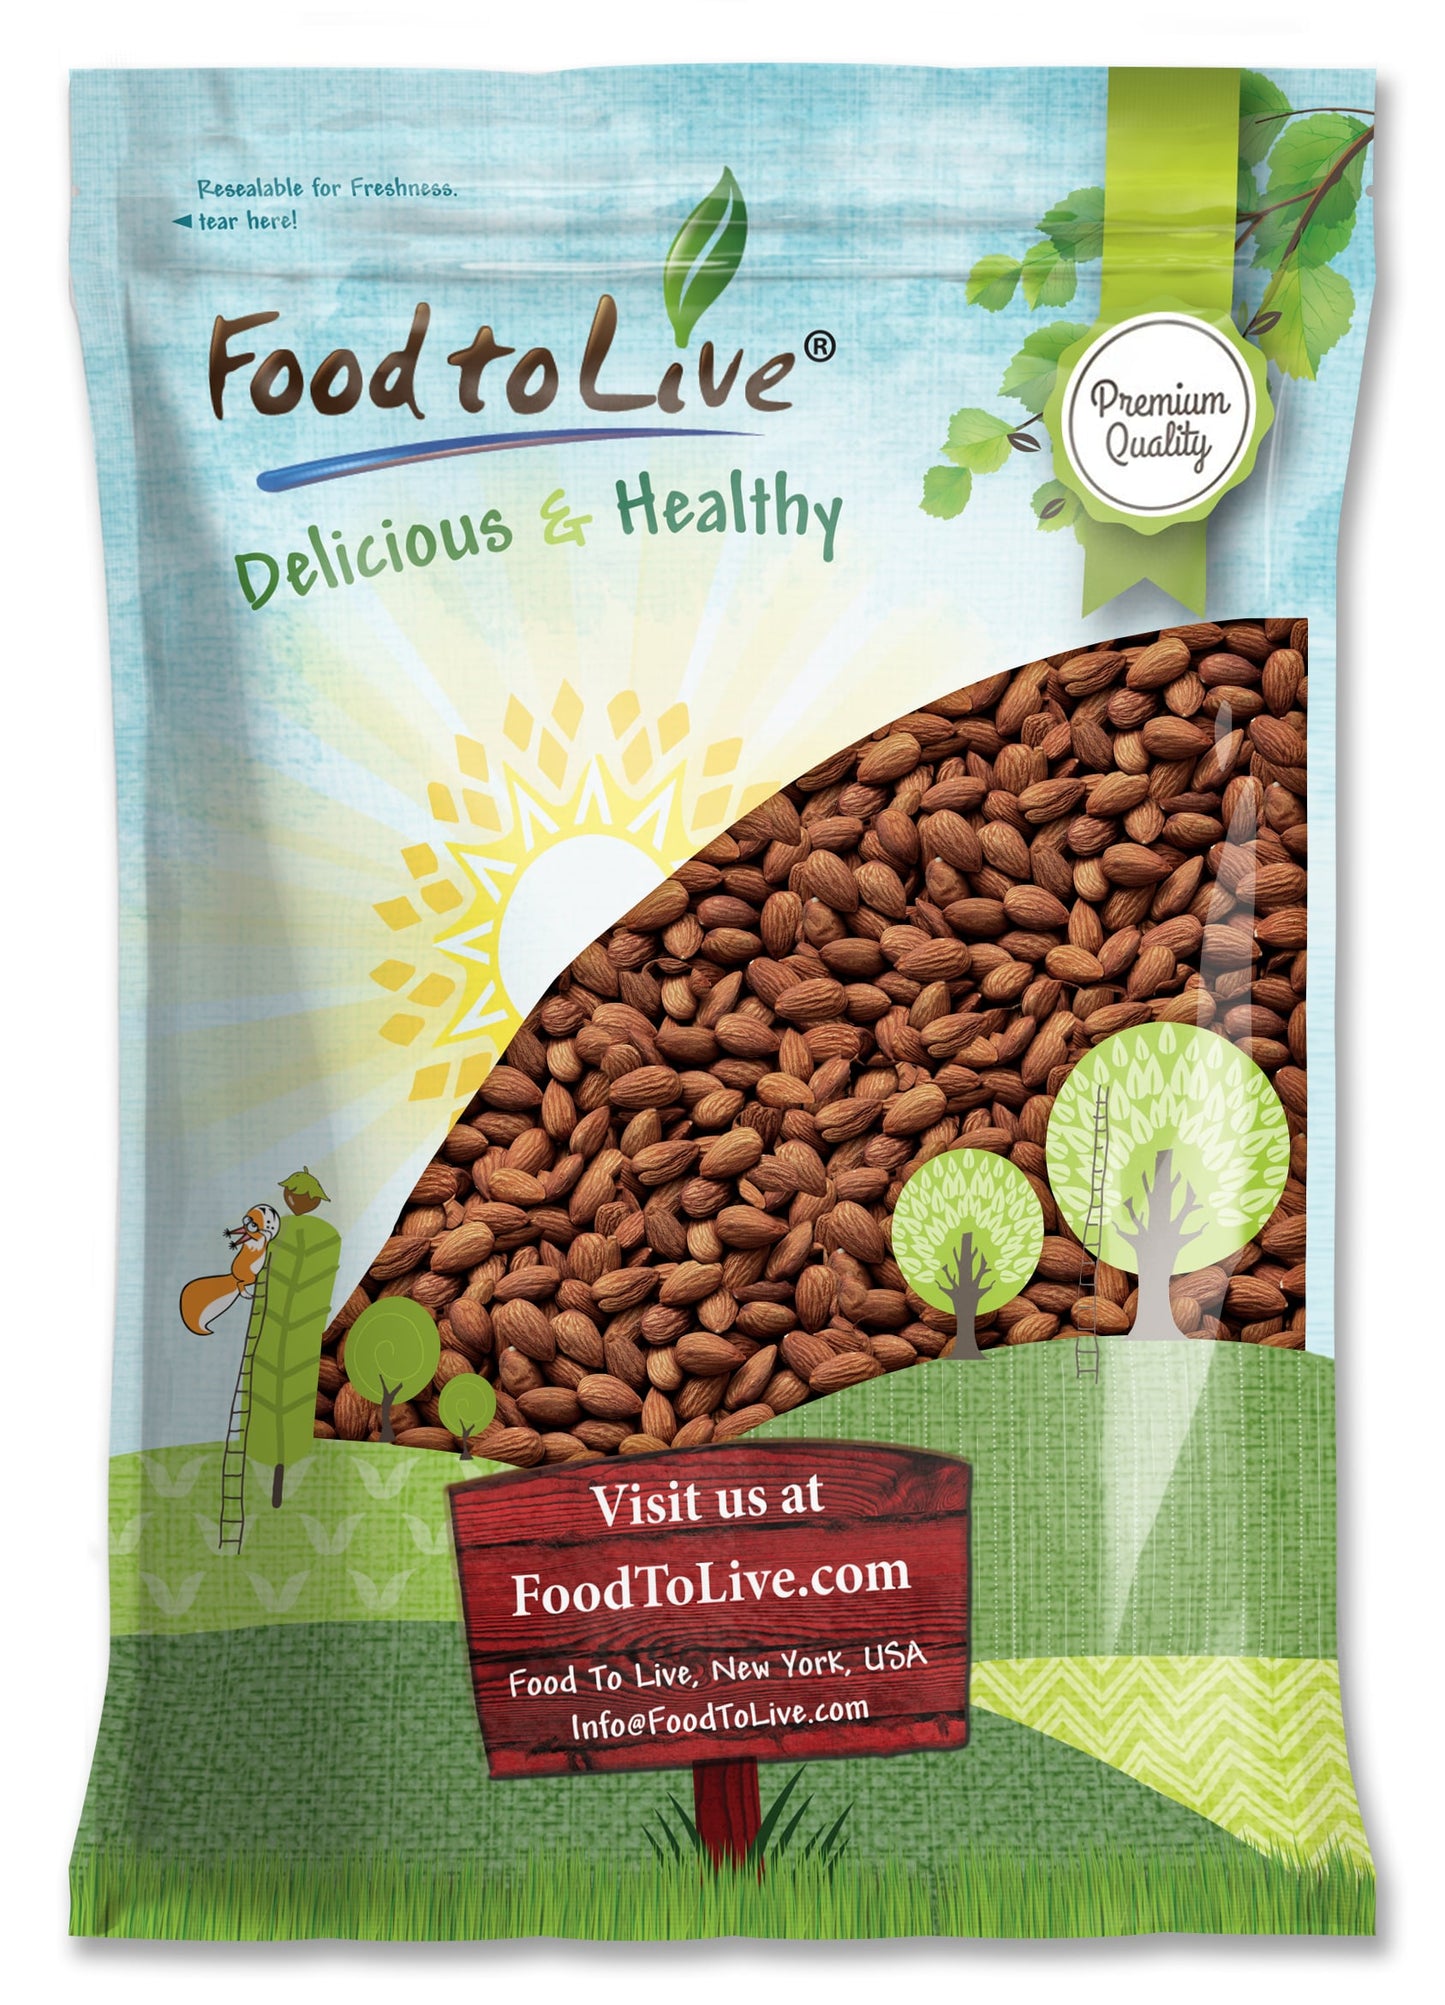 Dry Roasted California Almonds with Himalayan Salt – Oven Roasted, Lightly Salted Nuts, No Oil Added, Vegan, Kosher, Bulk. High in Protein and Essential Fatty Acids. Great Snack